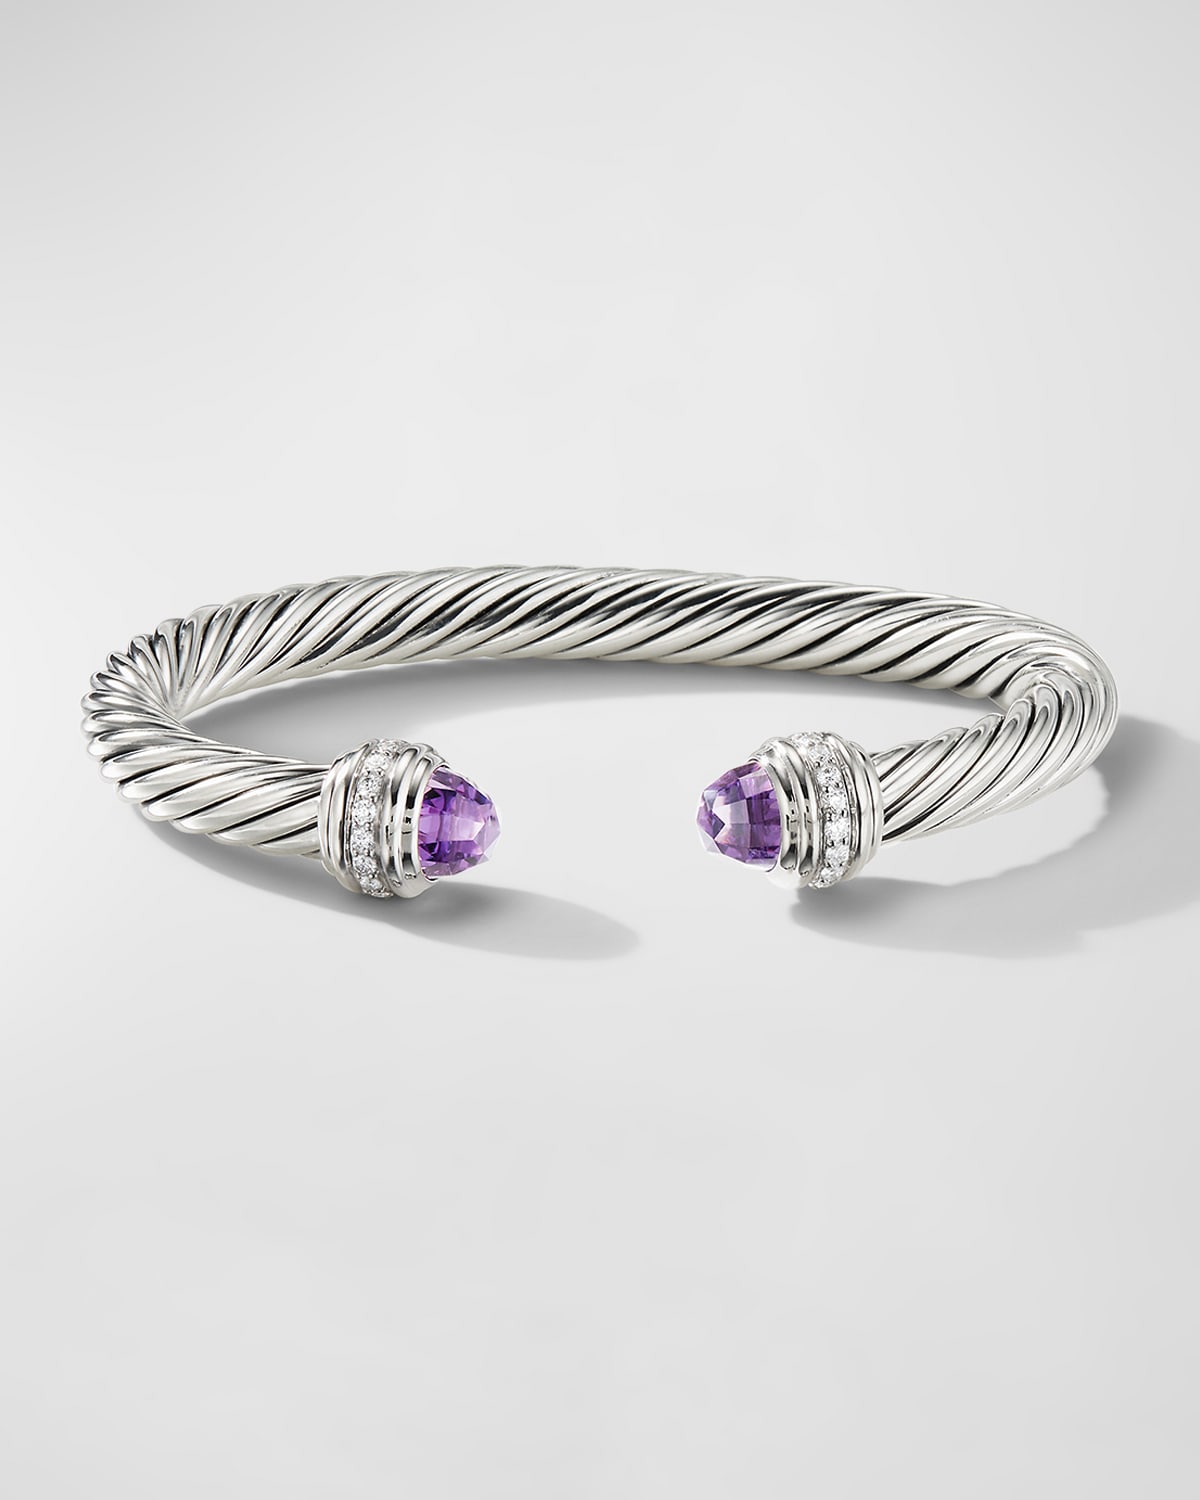 7mm Cable Bracelet with Diamonds & Amethyst